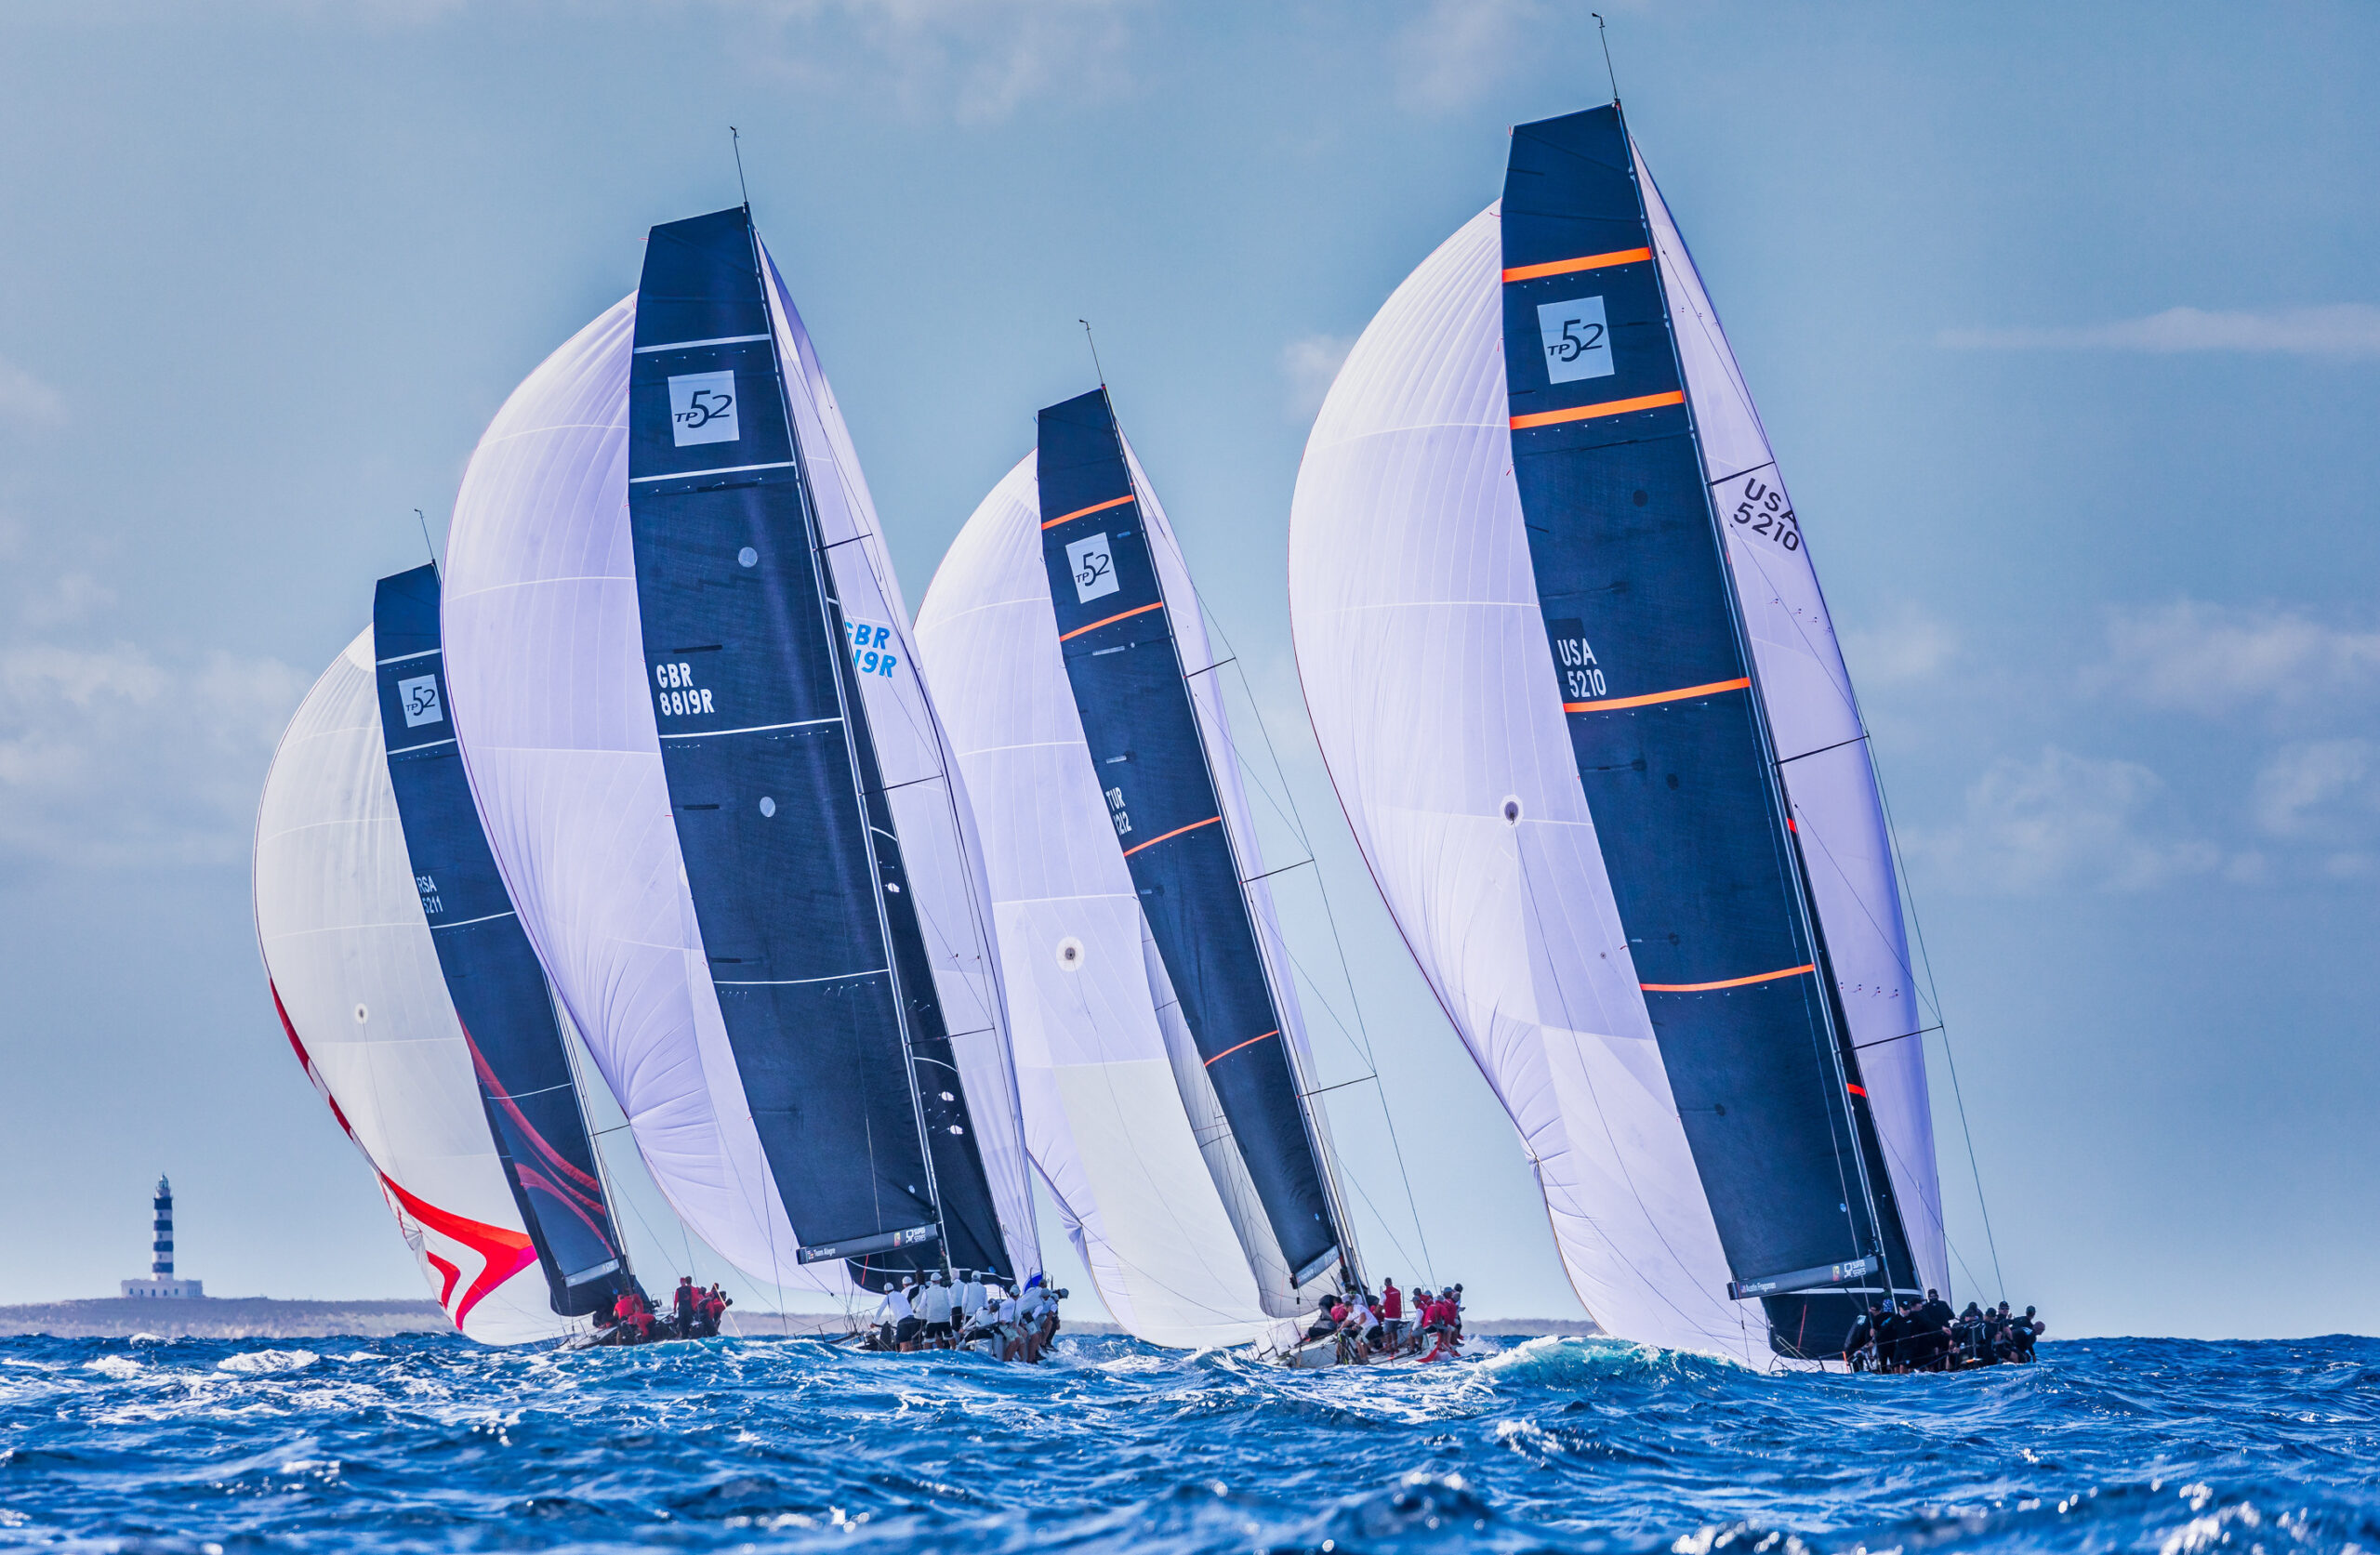 52 SUPER SERIES is partnering with Kick Out Plastic From 2022 Onwards